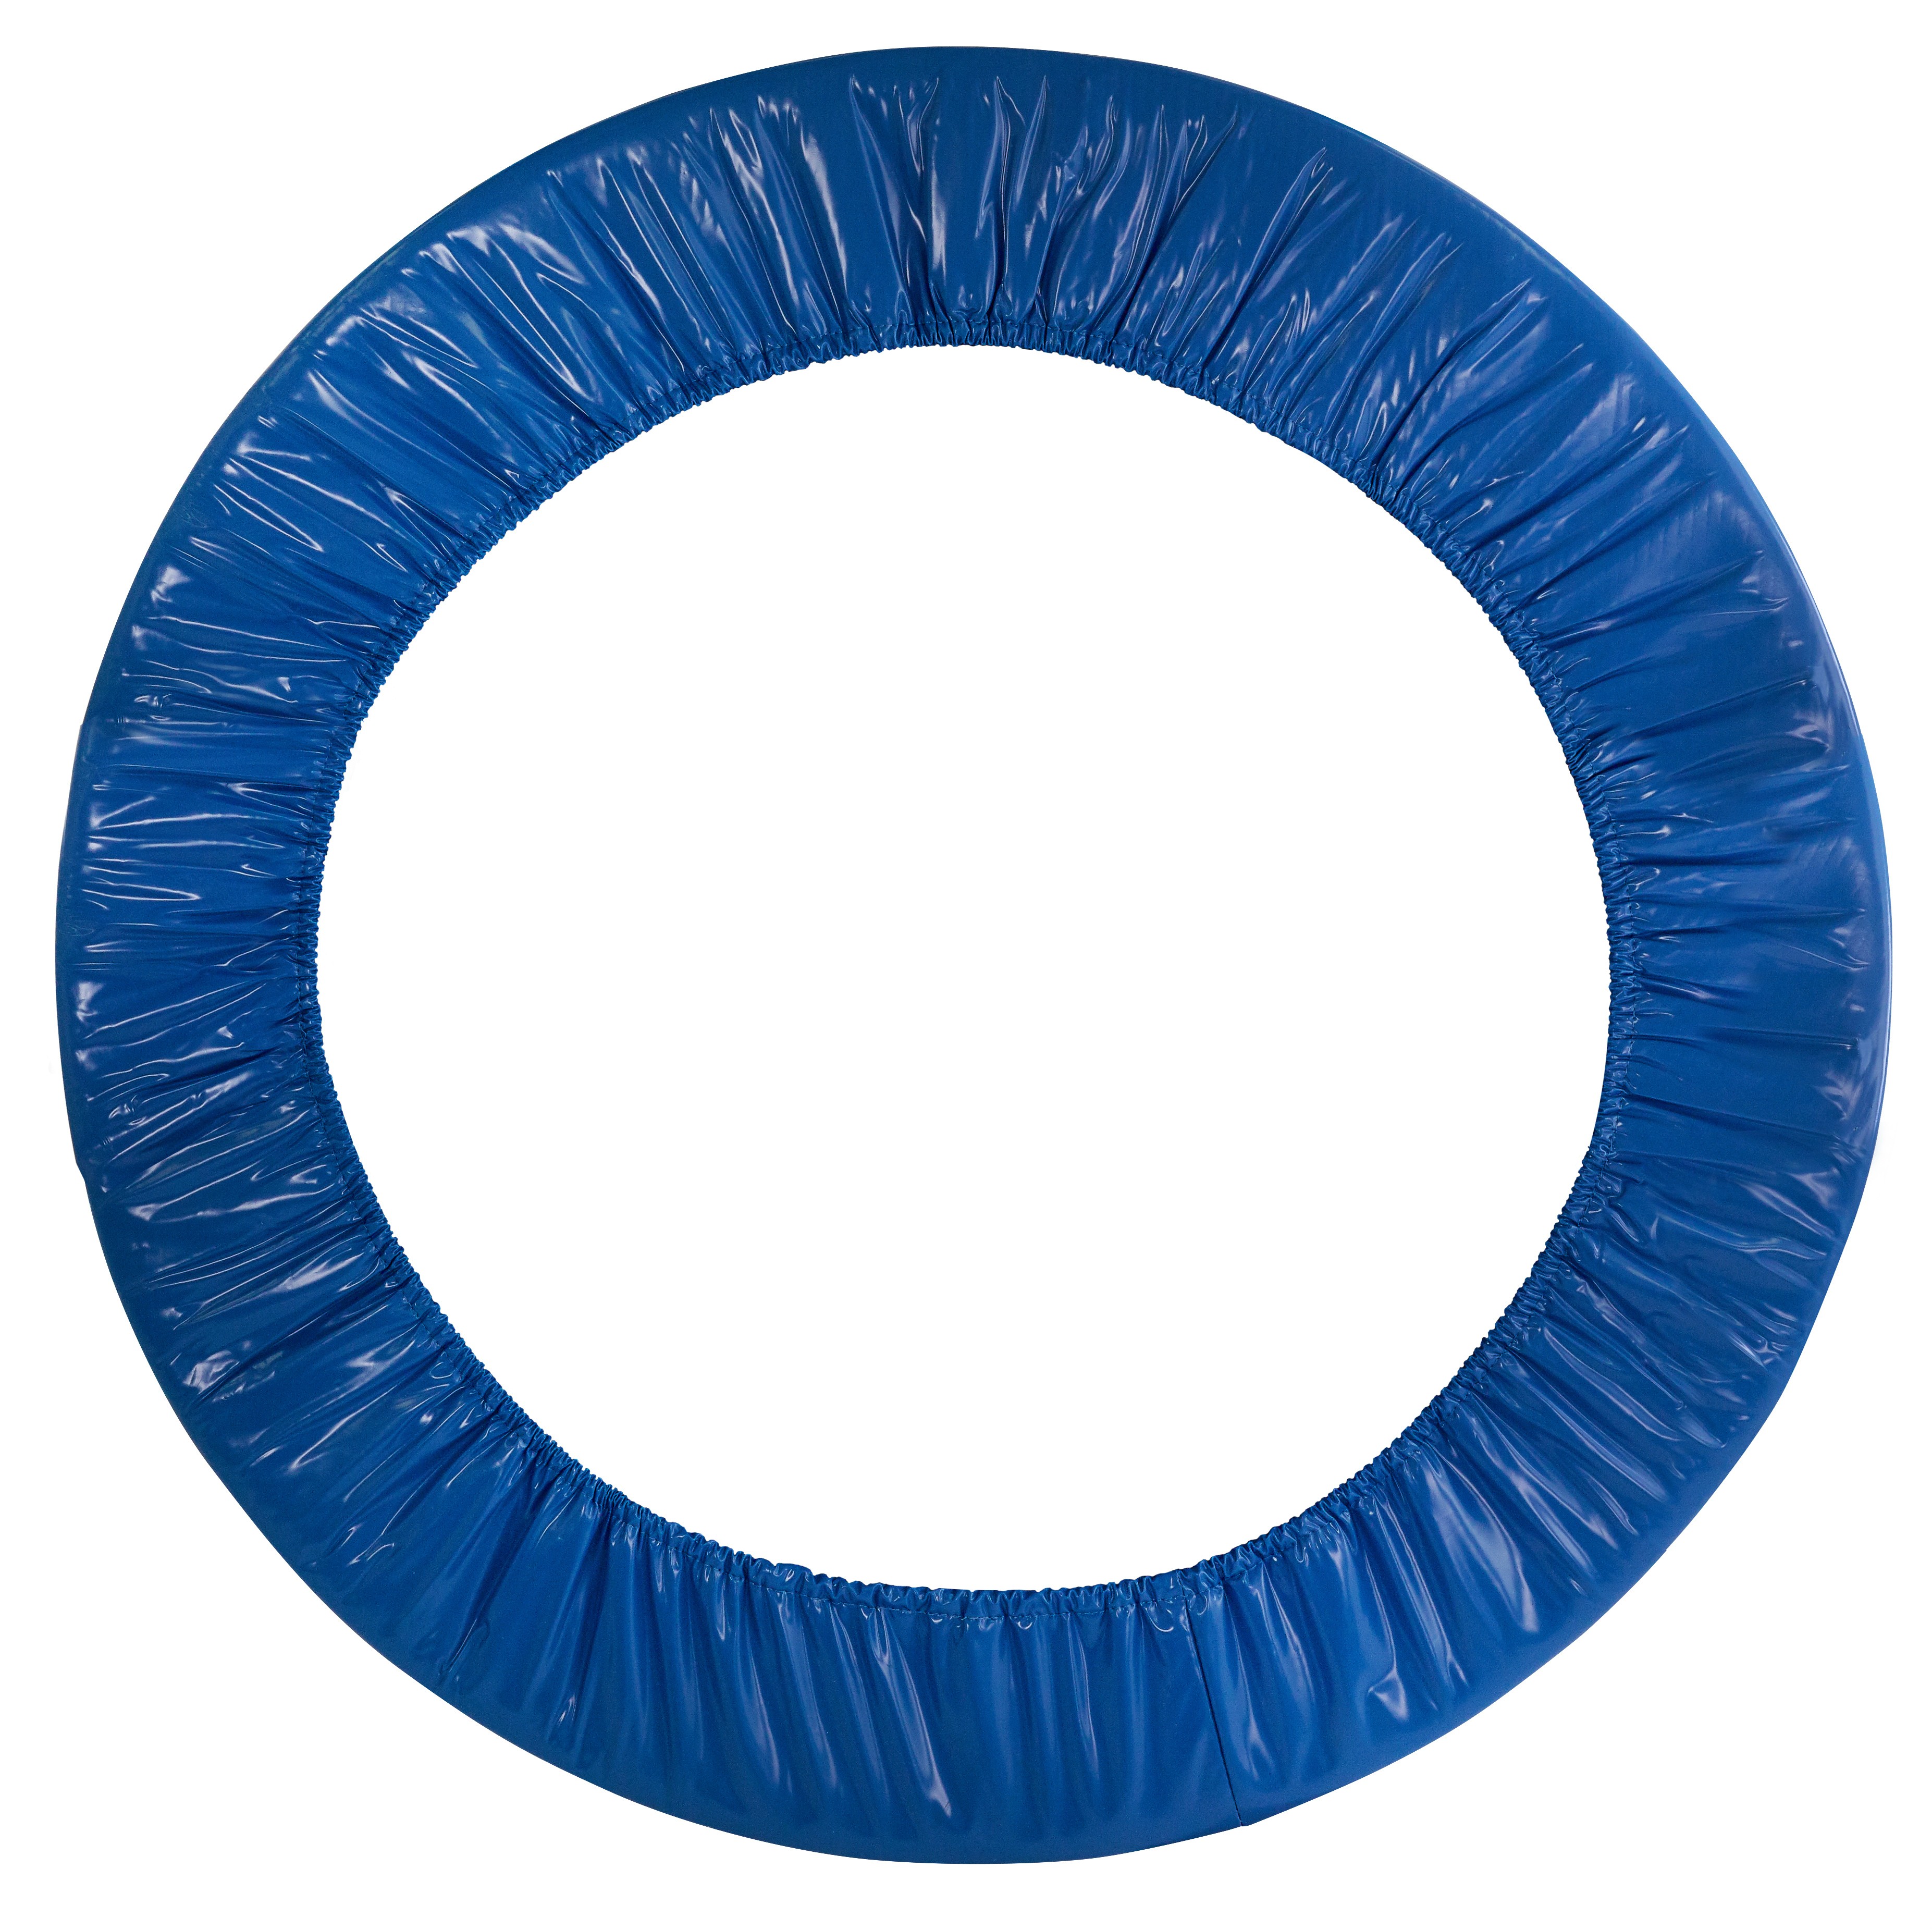 44" / 112cm Mini Round Trampoline Replacement Safety Pad (Spring Cover) for 6 Legs | Blue